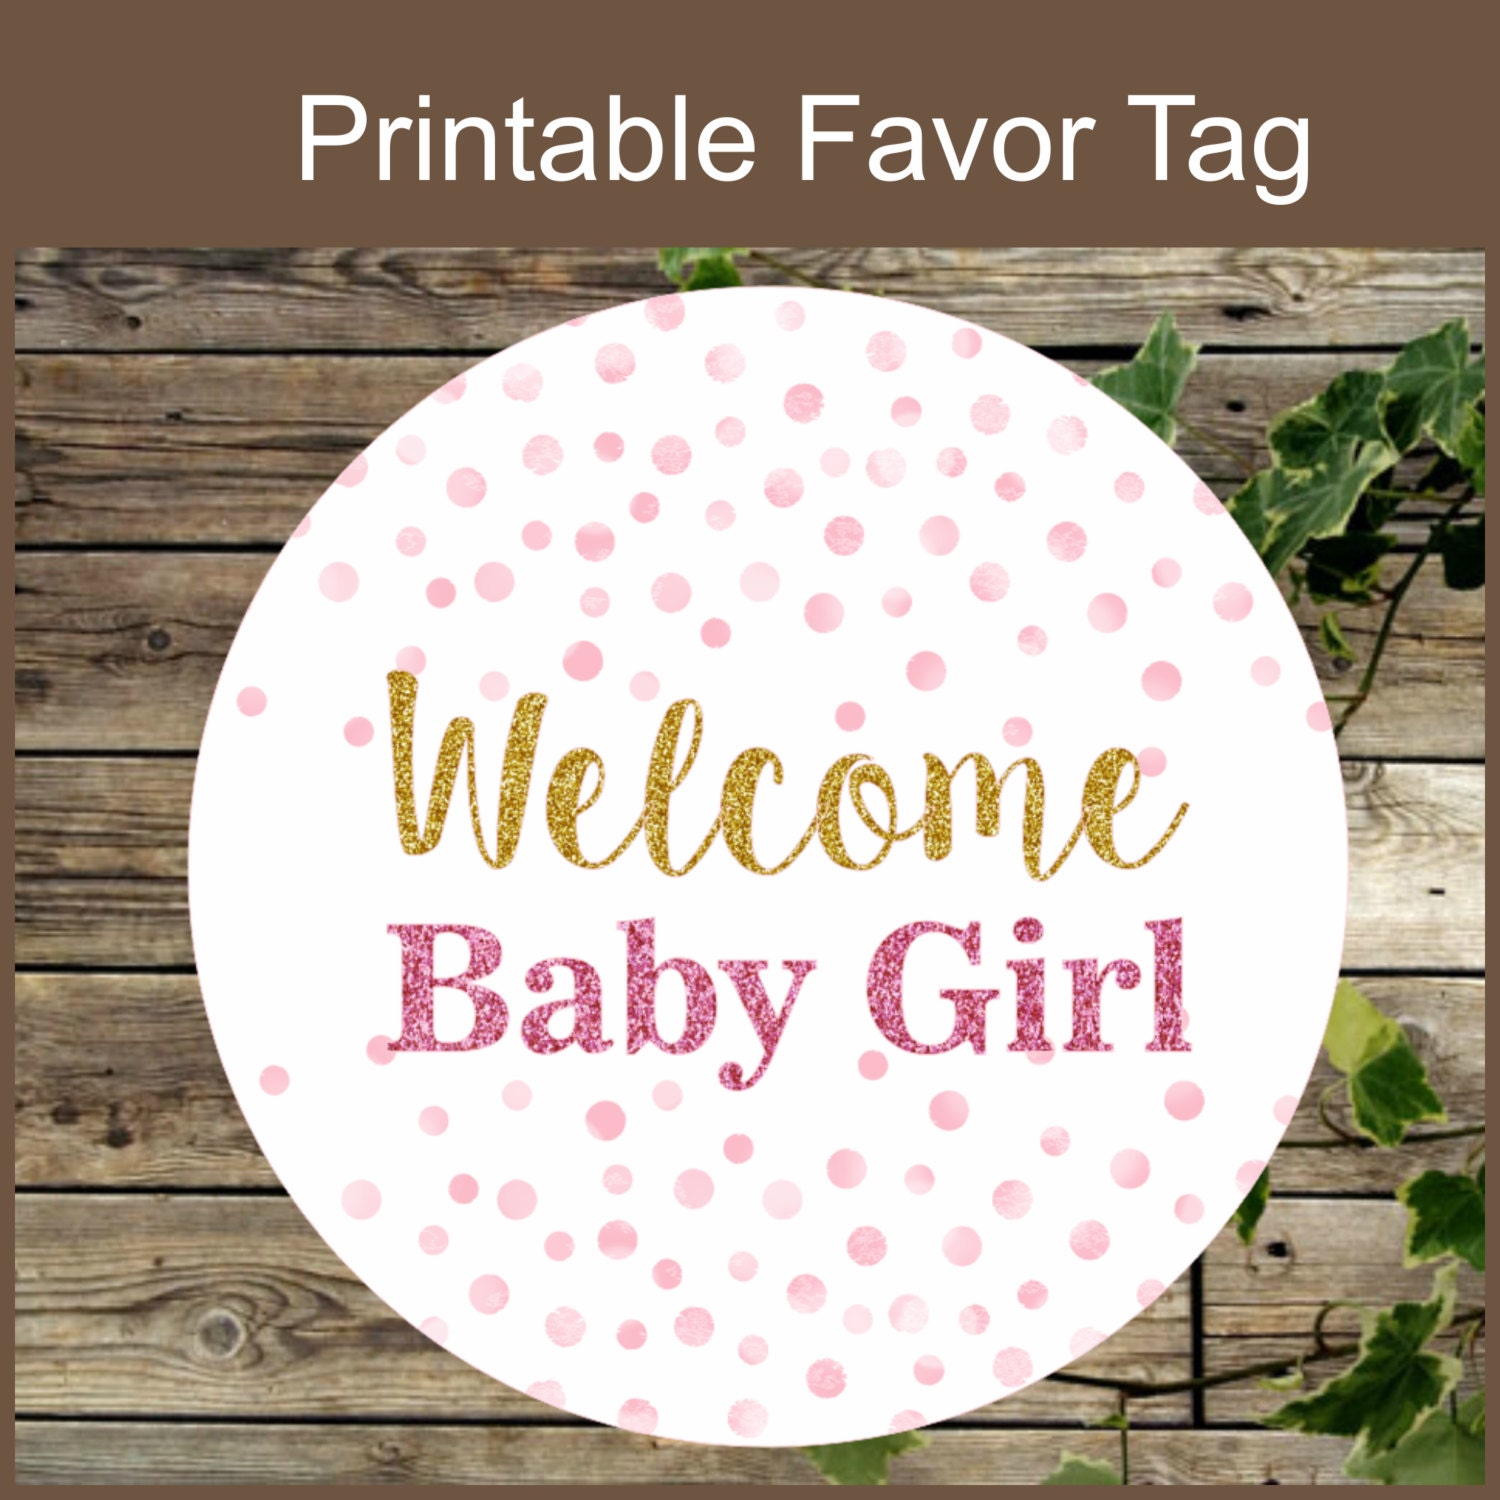 baby-shower-gift-taag-printable-free-printable-baby-shower-favor-tags-in-20-colors-play